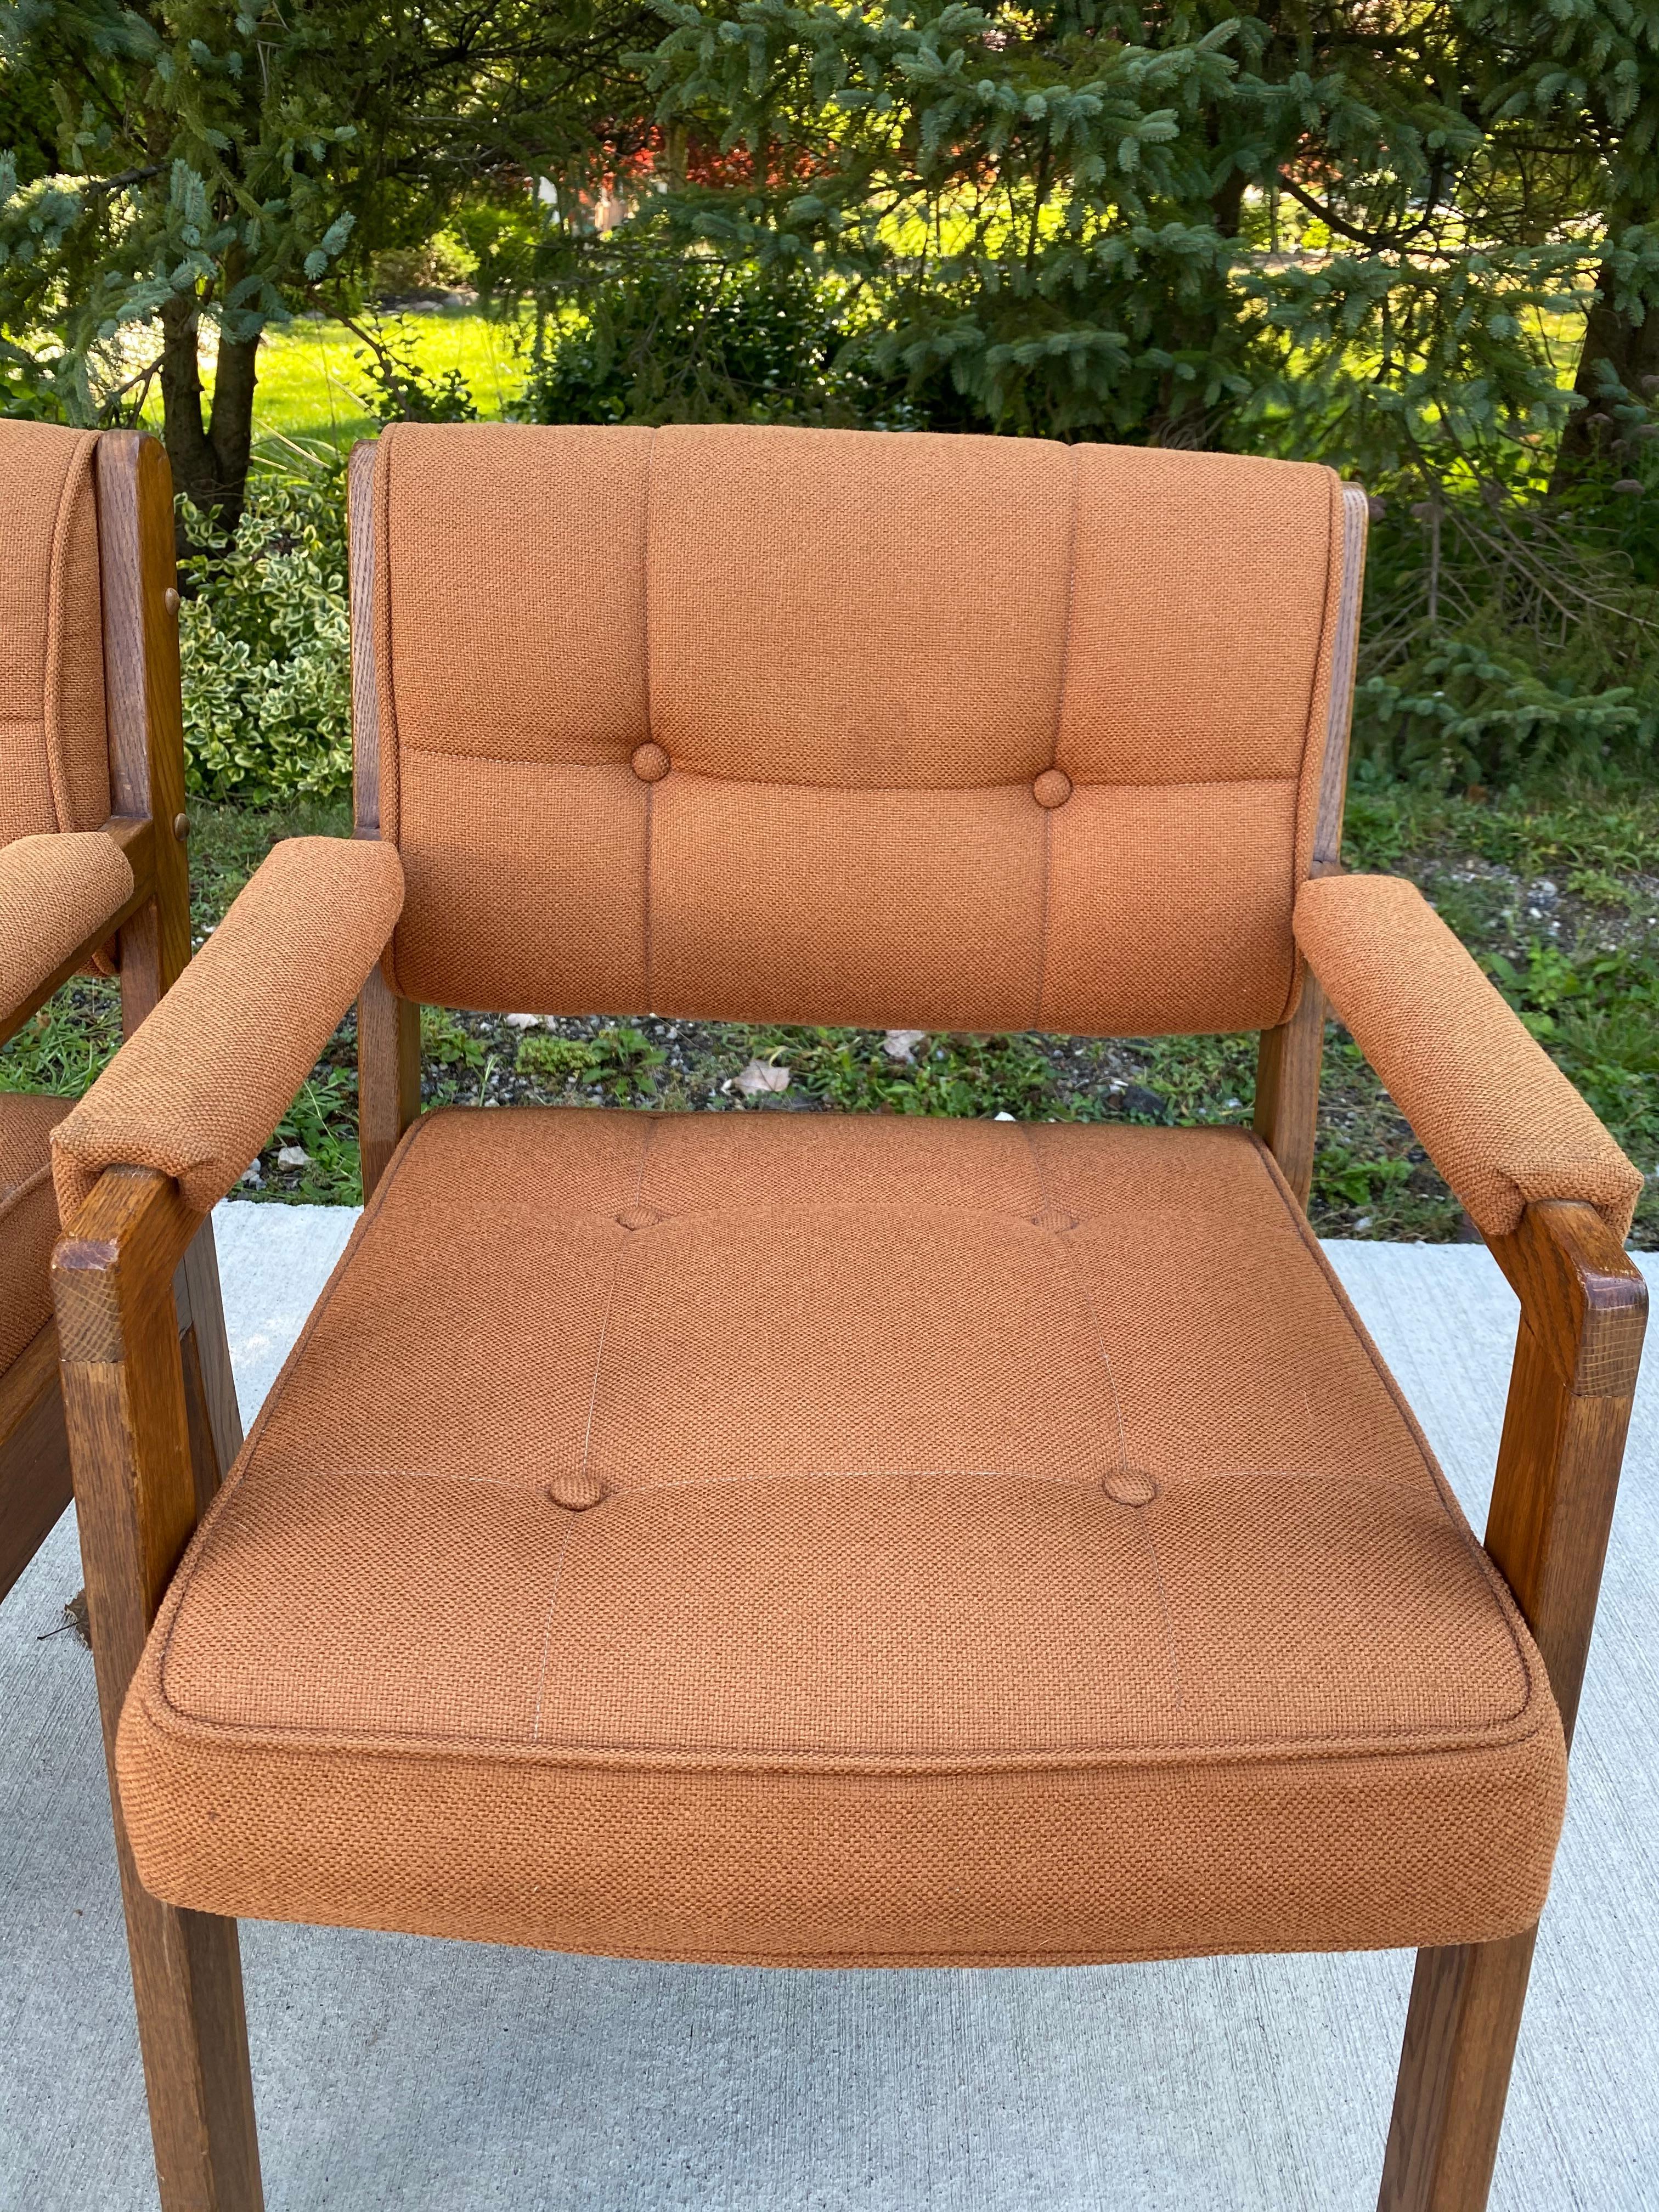 1980s, Set of 2 Orange Mid-Century Modern Style Accent Chairs 1